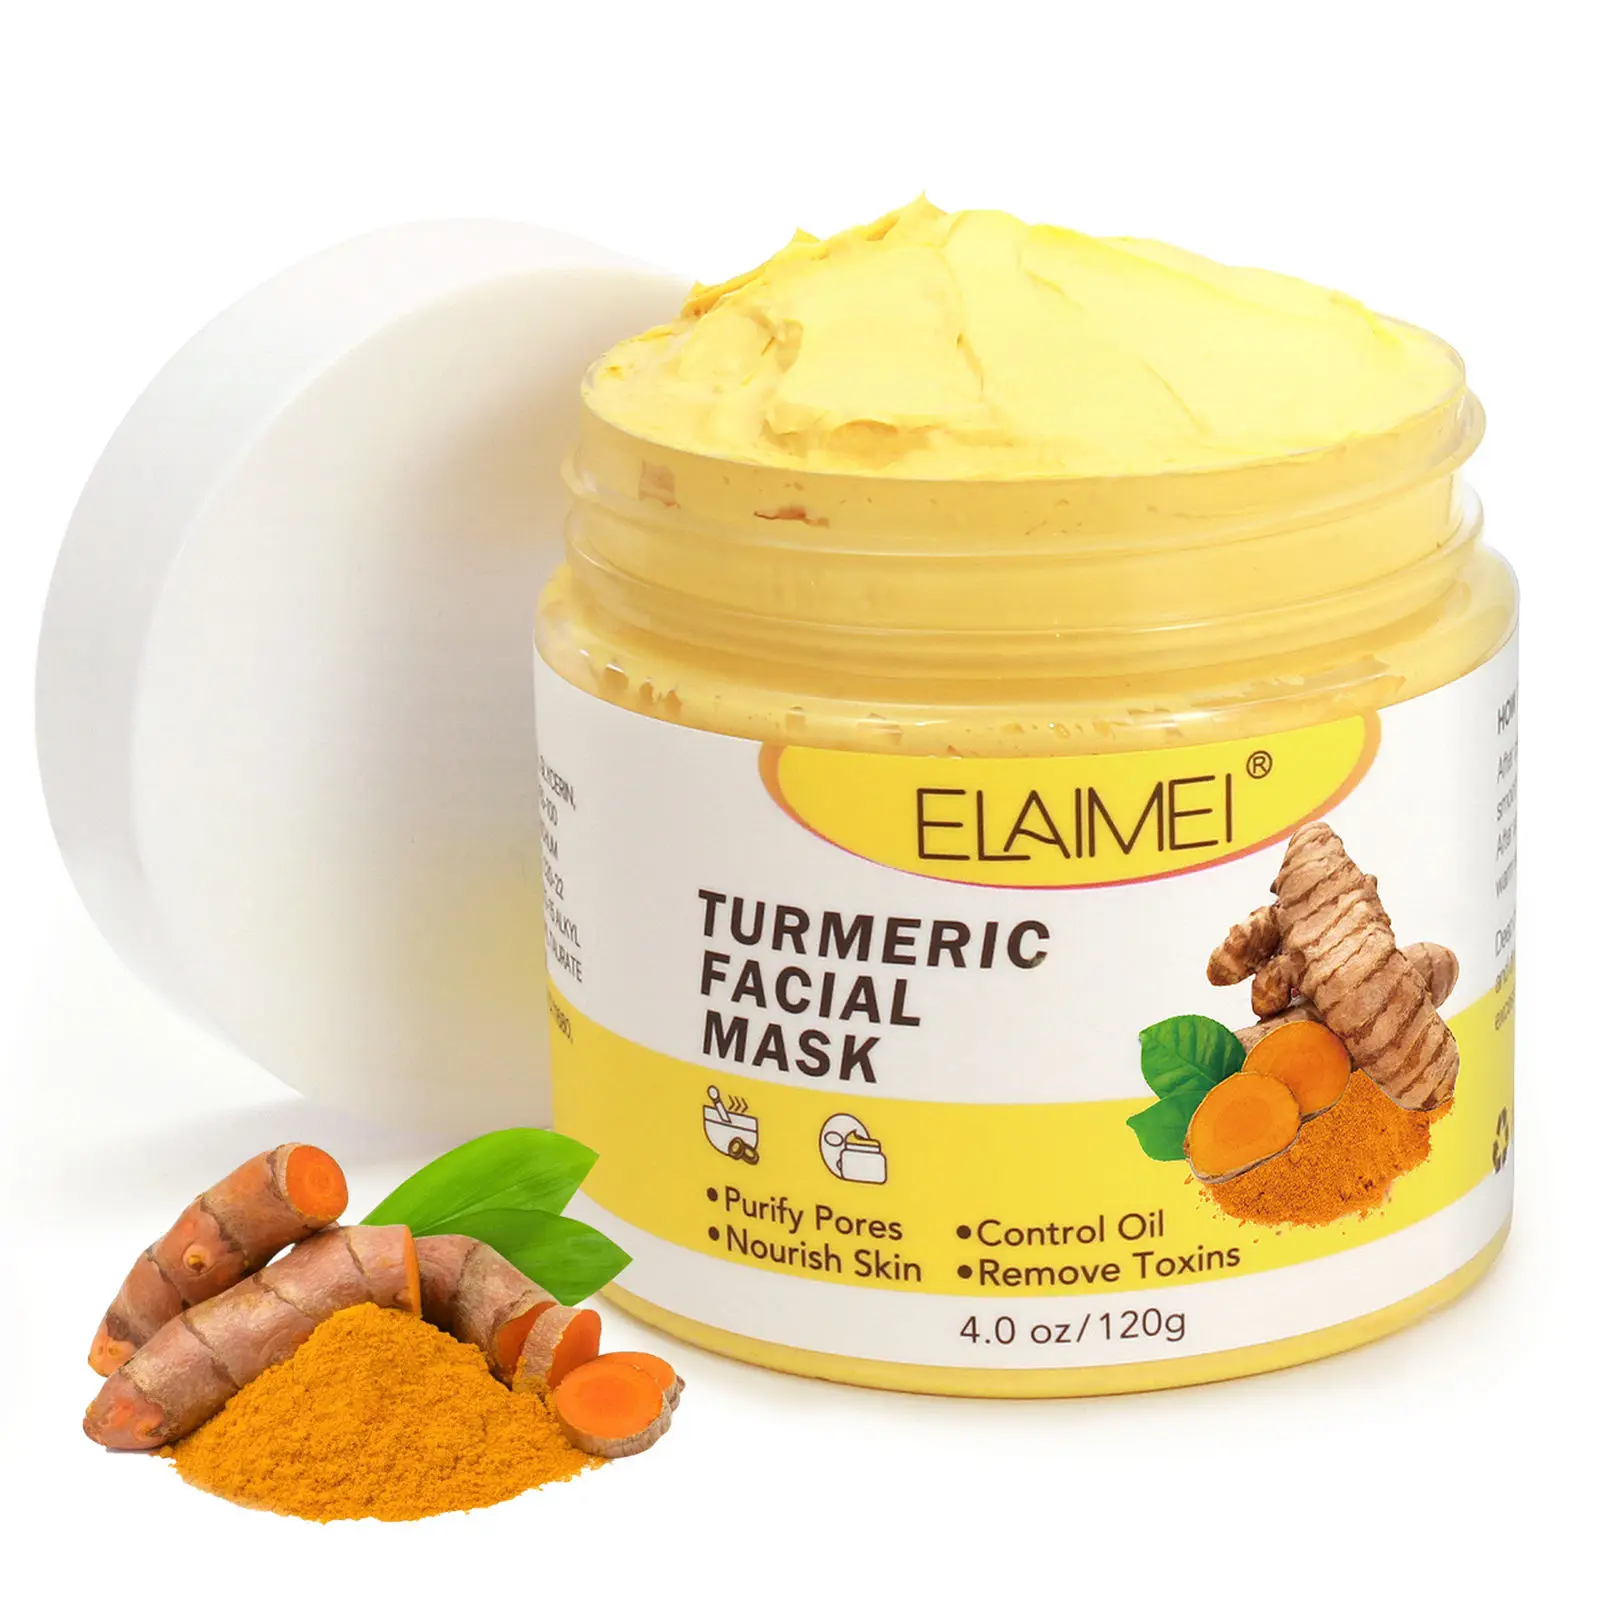 

Turmeric Face Clay Mask Beauty Facial Cleansing Blackheads Skin Care Brighten Tone Purify Pores Oil Control Facial Mud Mask